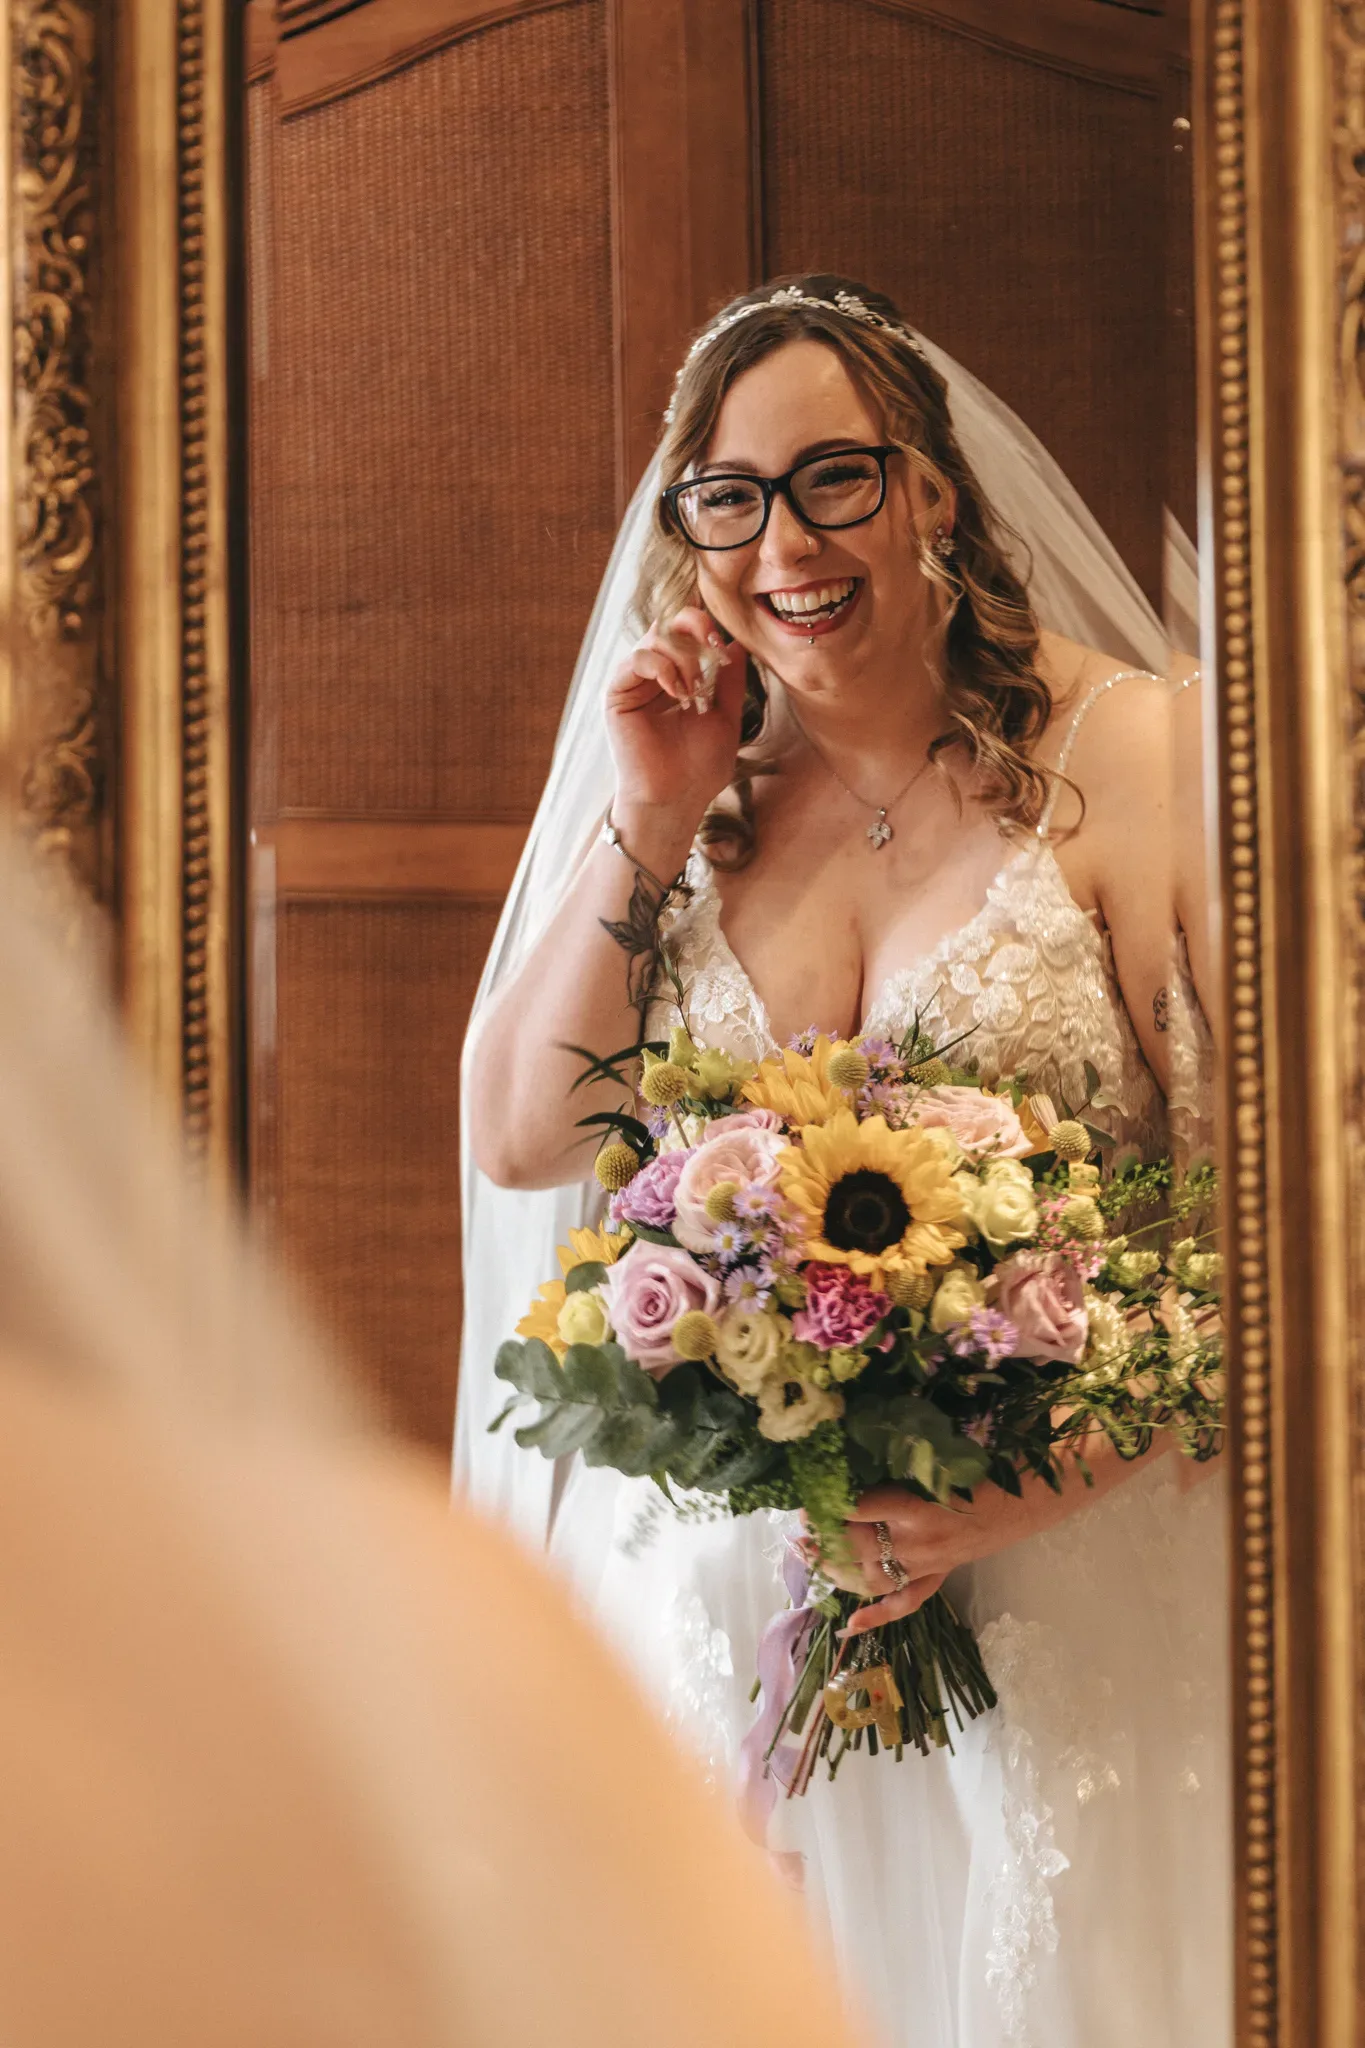 A radiant bride in a lace gown smiles joyfully while adjusting her glasses, clutching a vibrant bouquet of sunflowers and roses, framed by an ornate mirror.